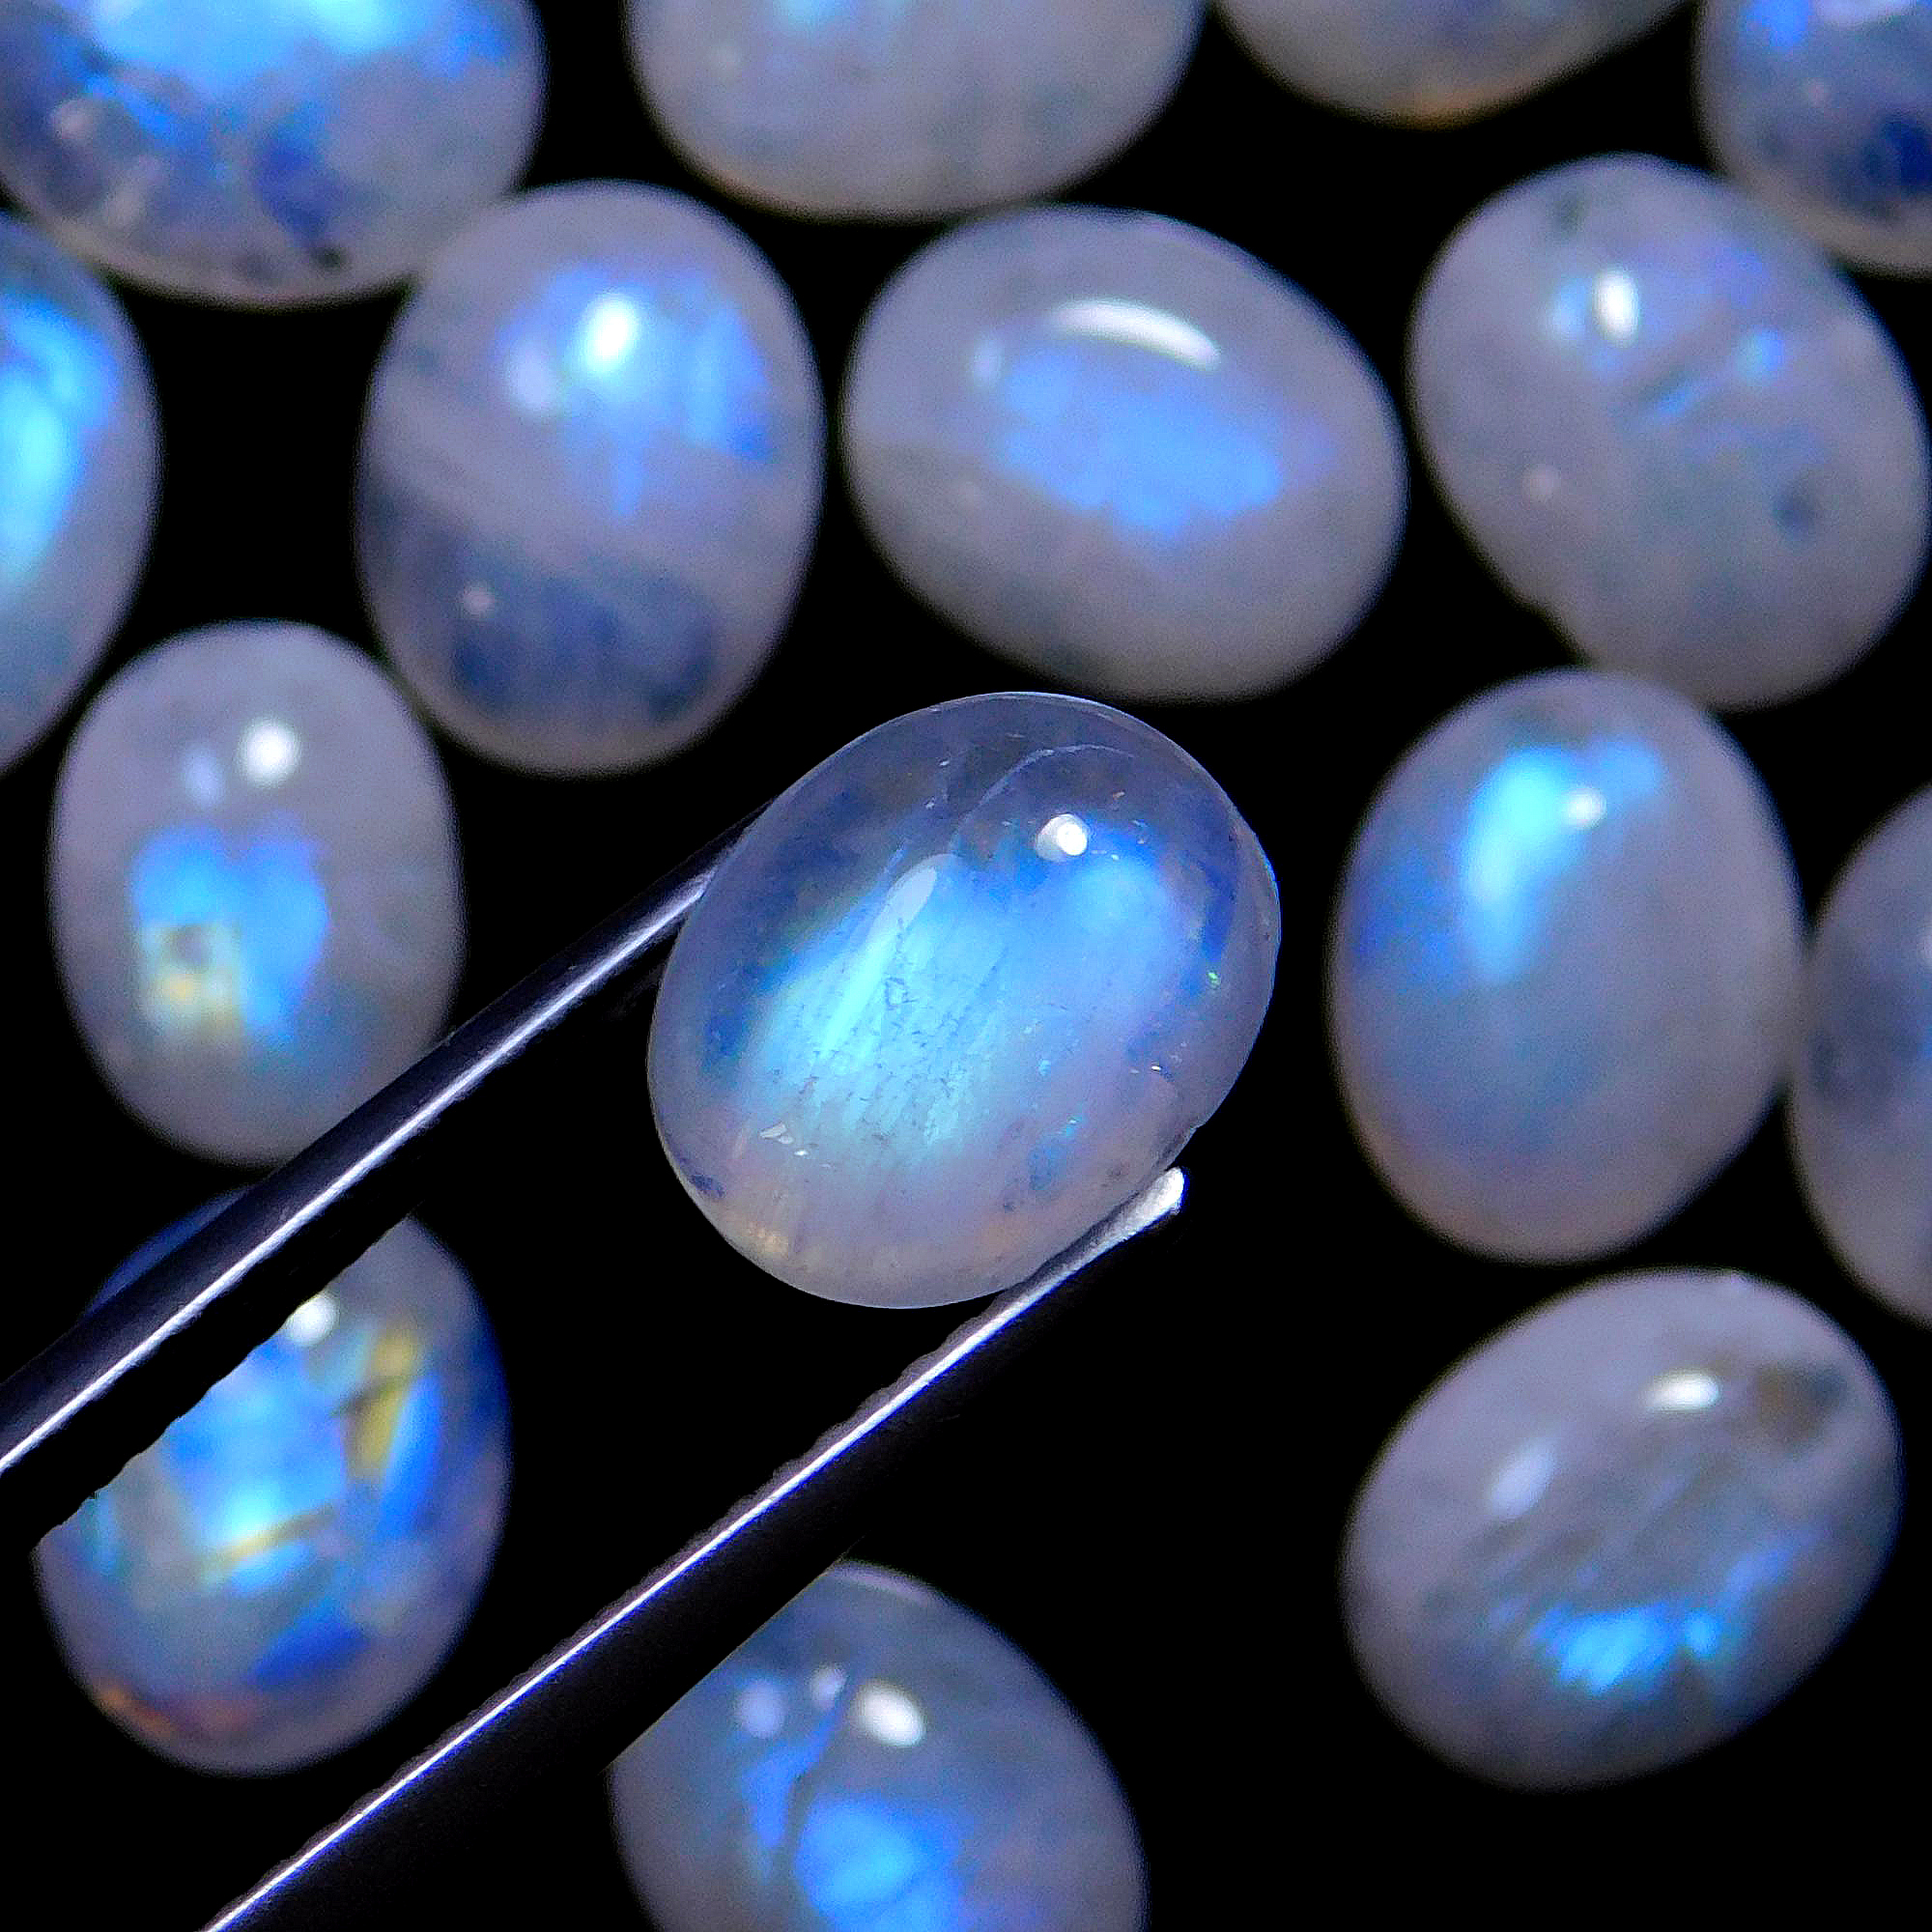 18 Pcs.62 Cts. Natural Rainbow Moonstone calibrated Oval Cabochon Loose Gemstone Wholesale Lot Size 10x8mm